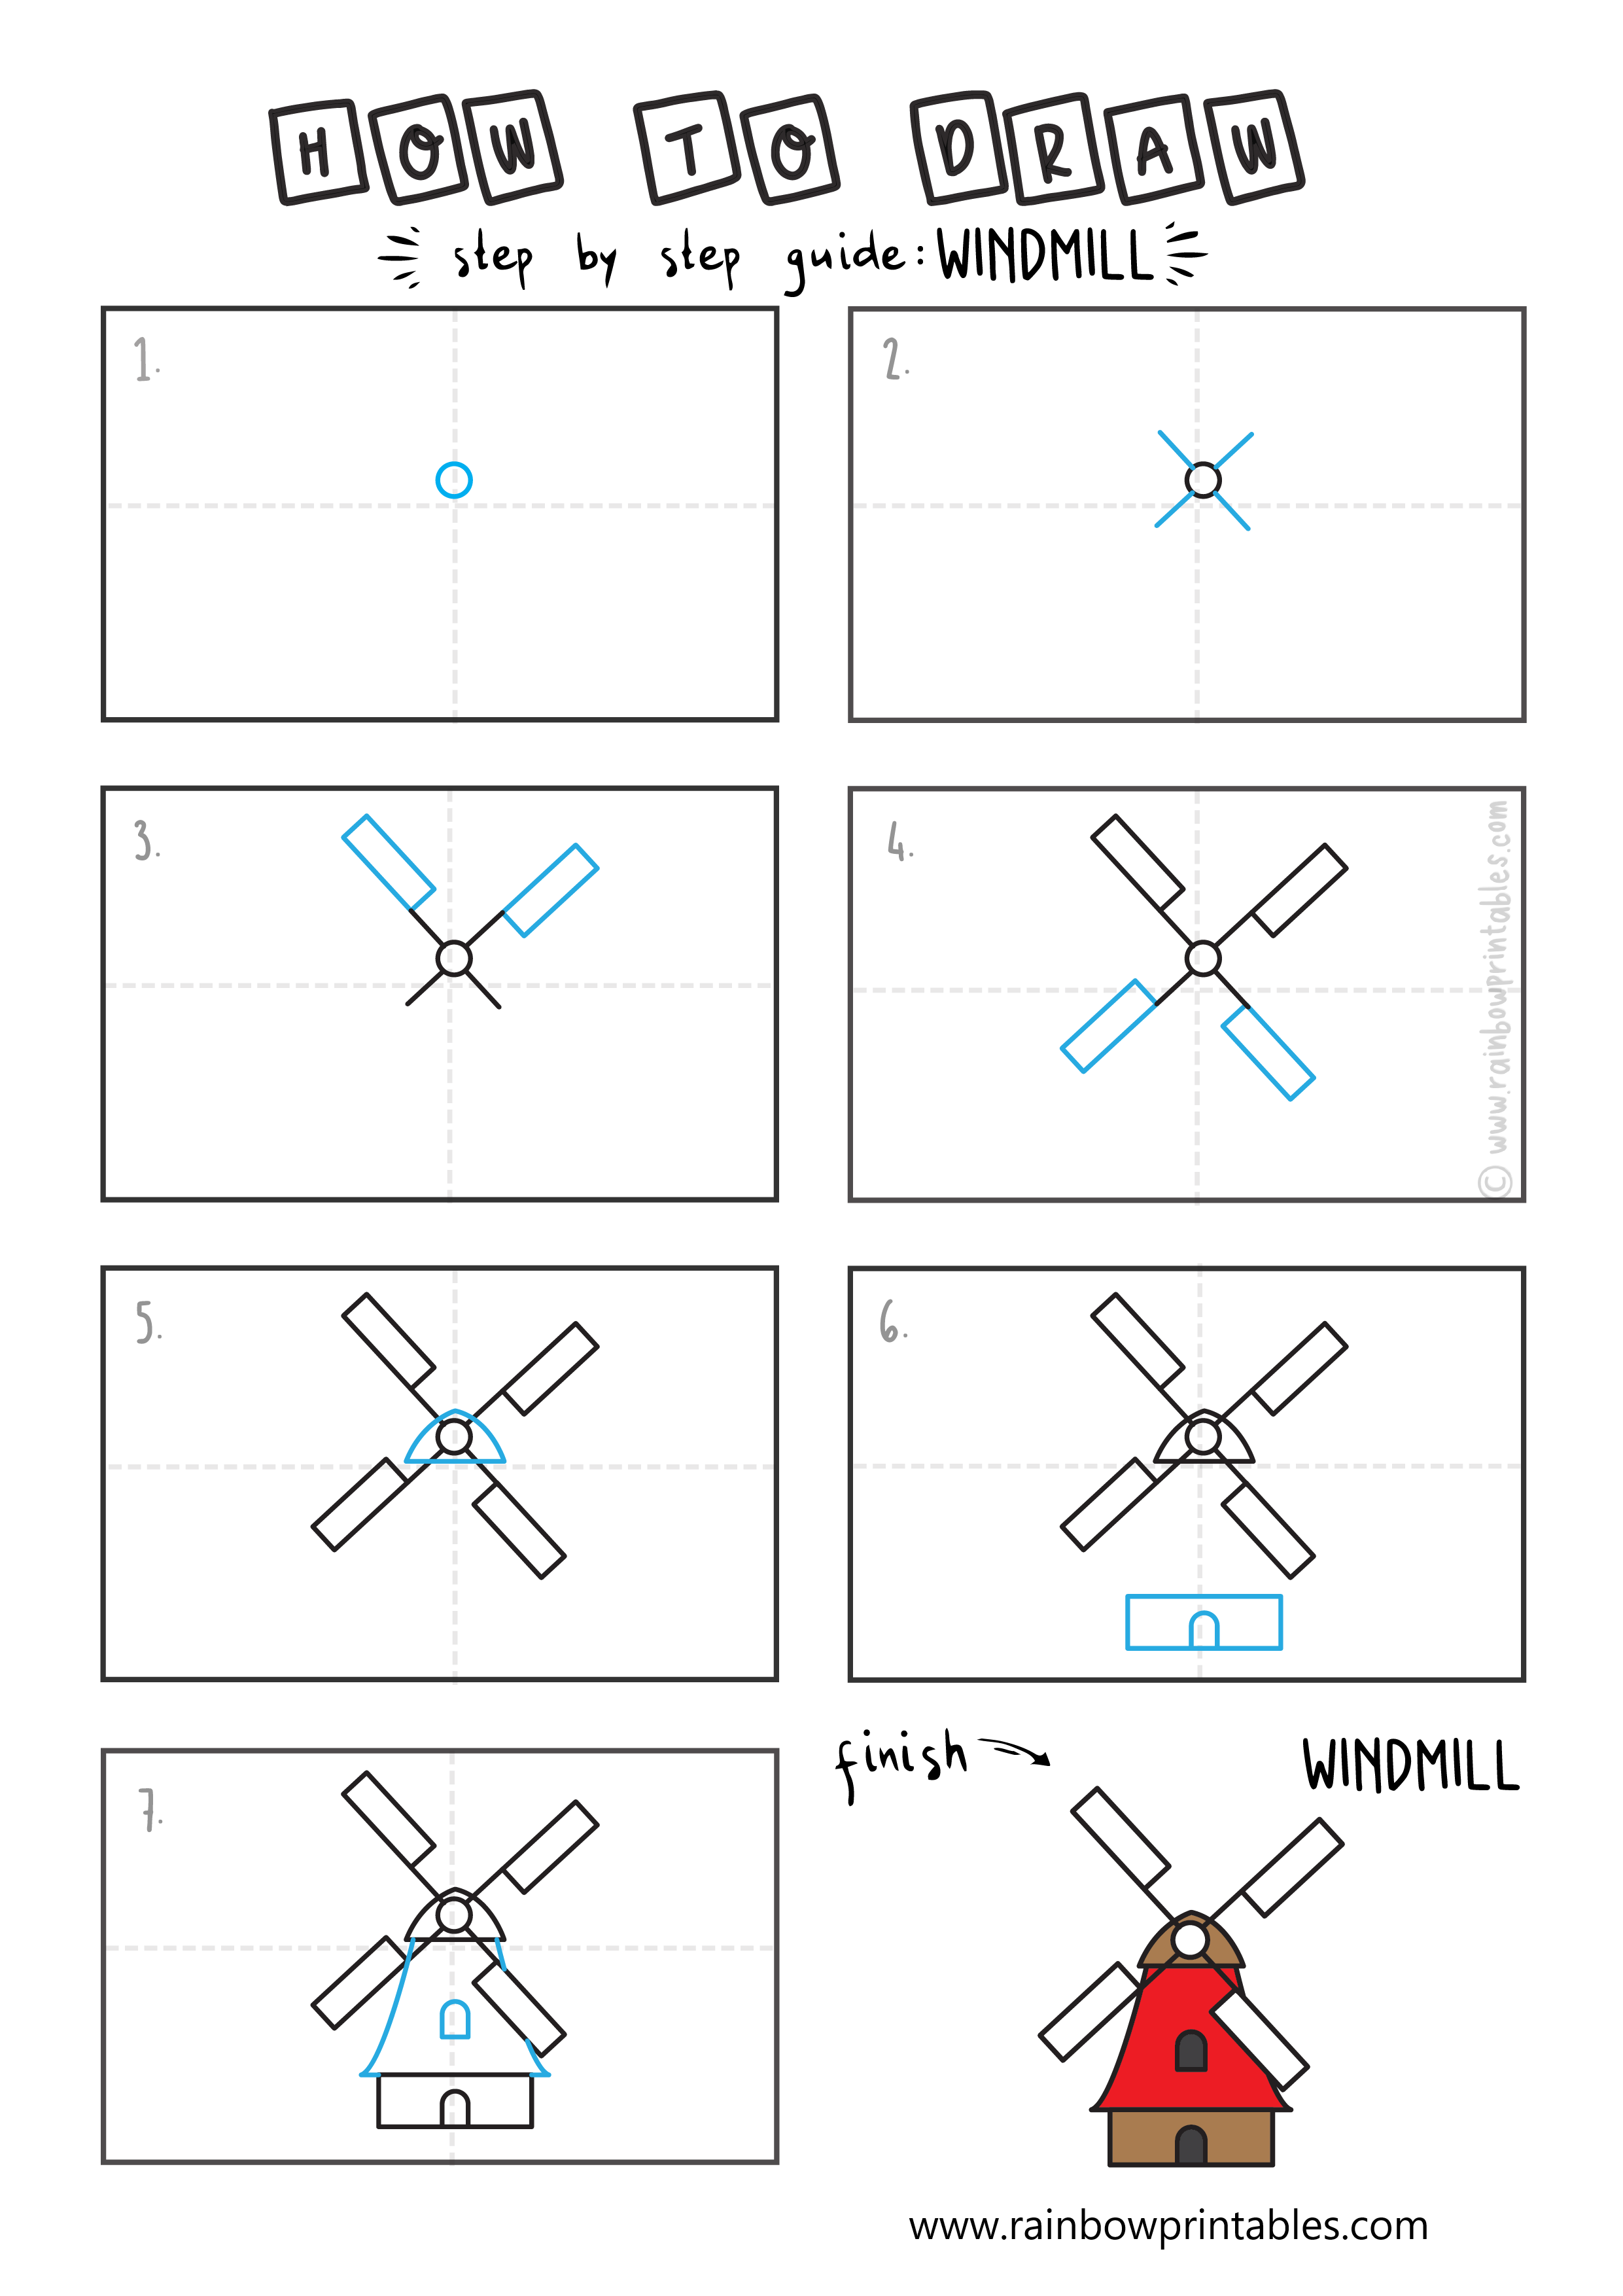 HOW TO DRAW A WINDMILL BUILDING ILLUSTRATION STEP BY STEP EASY SIMPLE FOR KIDS